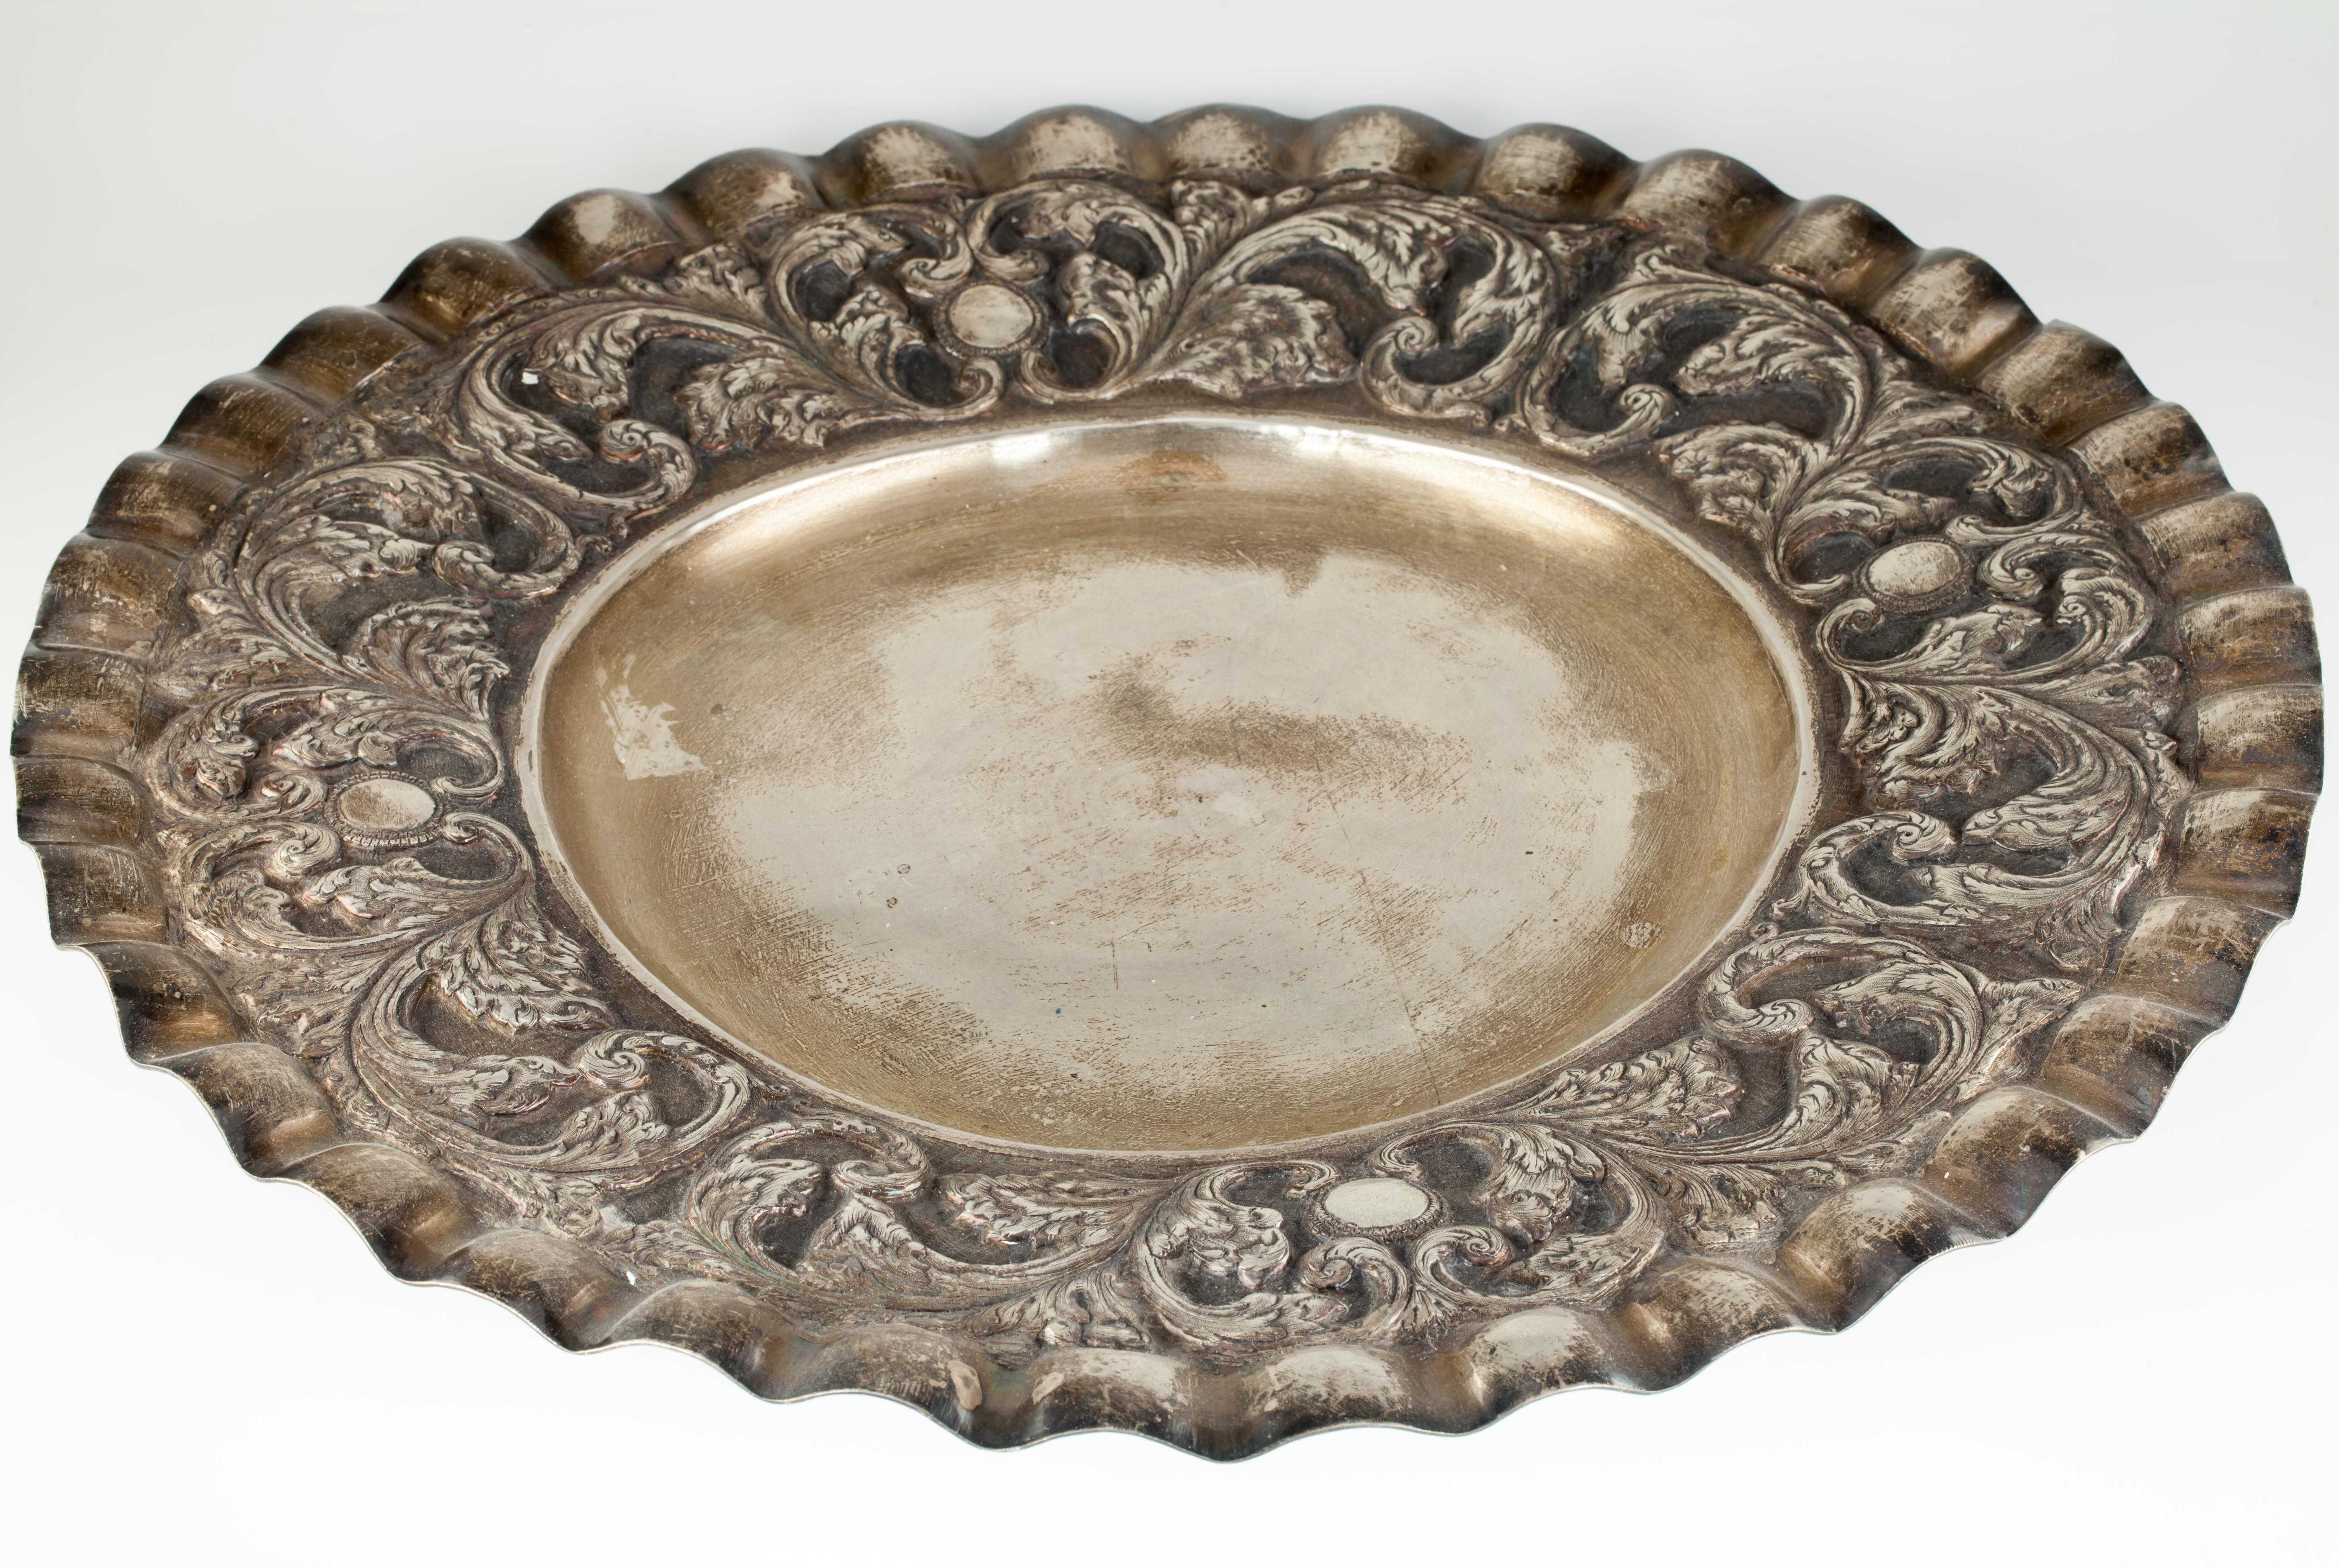 Gorgeous Silver Tray with Ruffled Edge
Beautiful Hand-Chased Repousse Design
40 Oz of Silver
18.25